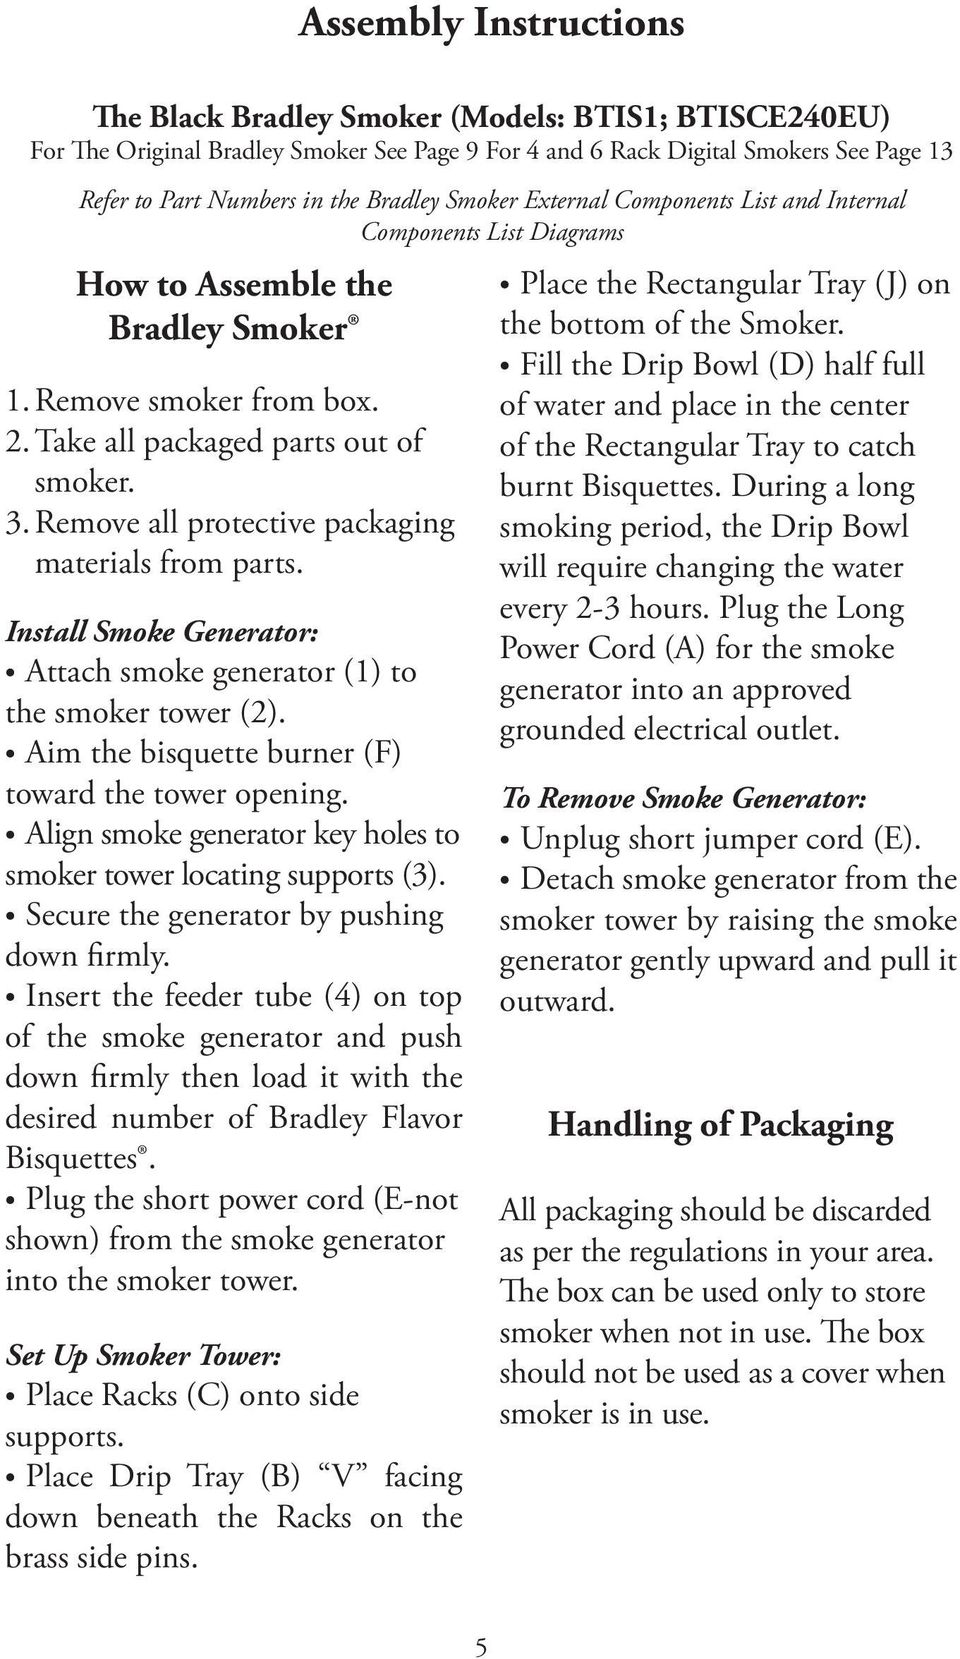 Remove all protective packaging materials from parts. Install Smoke Generator: Attach smoke generator (1) to the smoker tower (2). Aim the bisquette burner (F) toward the tower opening.